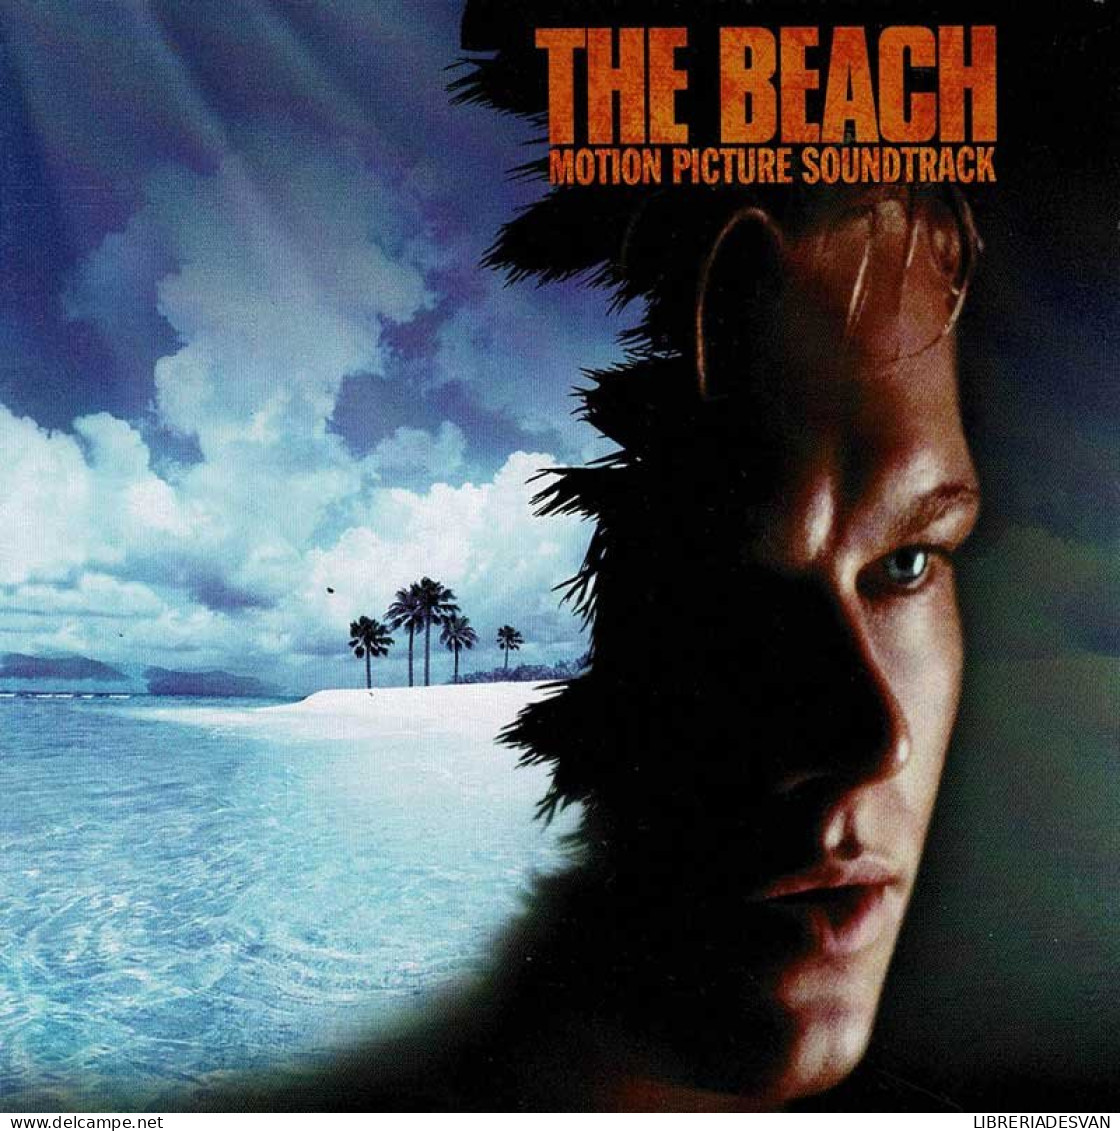 The Beach (Motion Picture Soundtrack). CD - Filmmusik